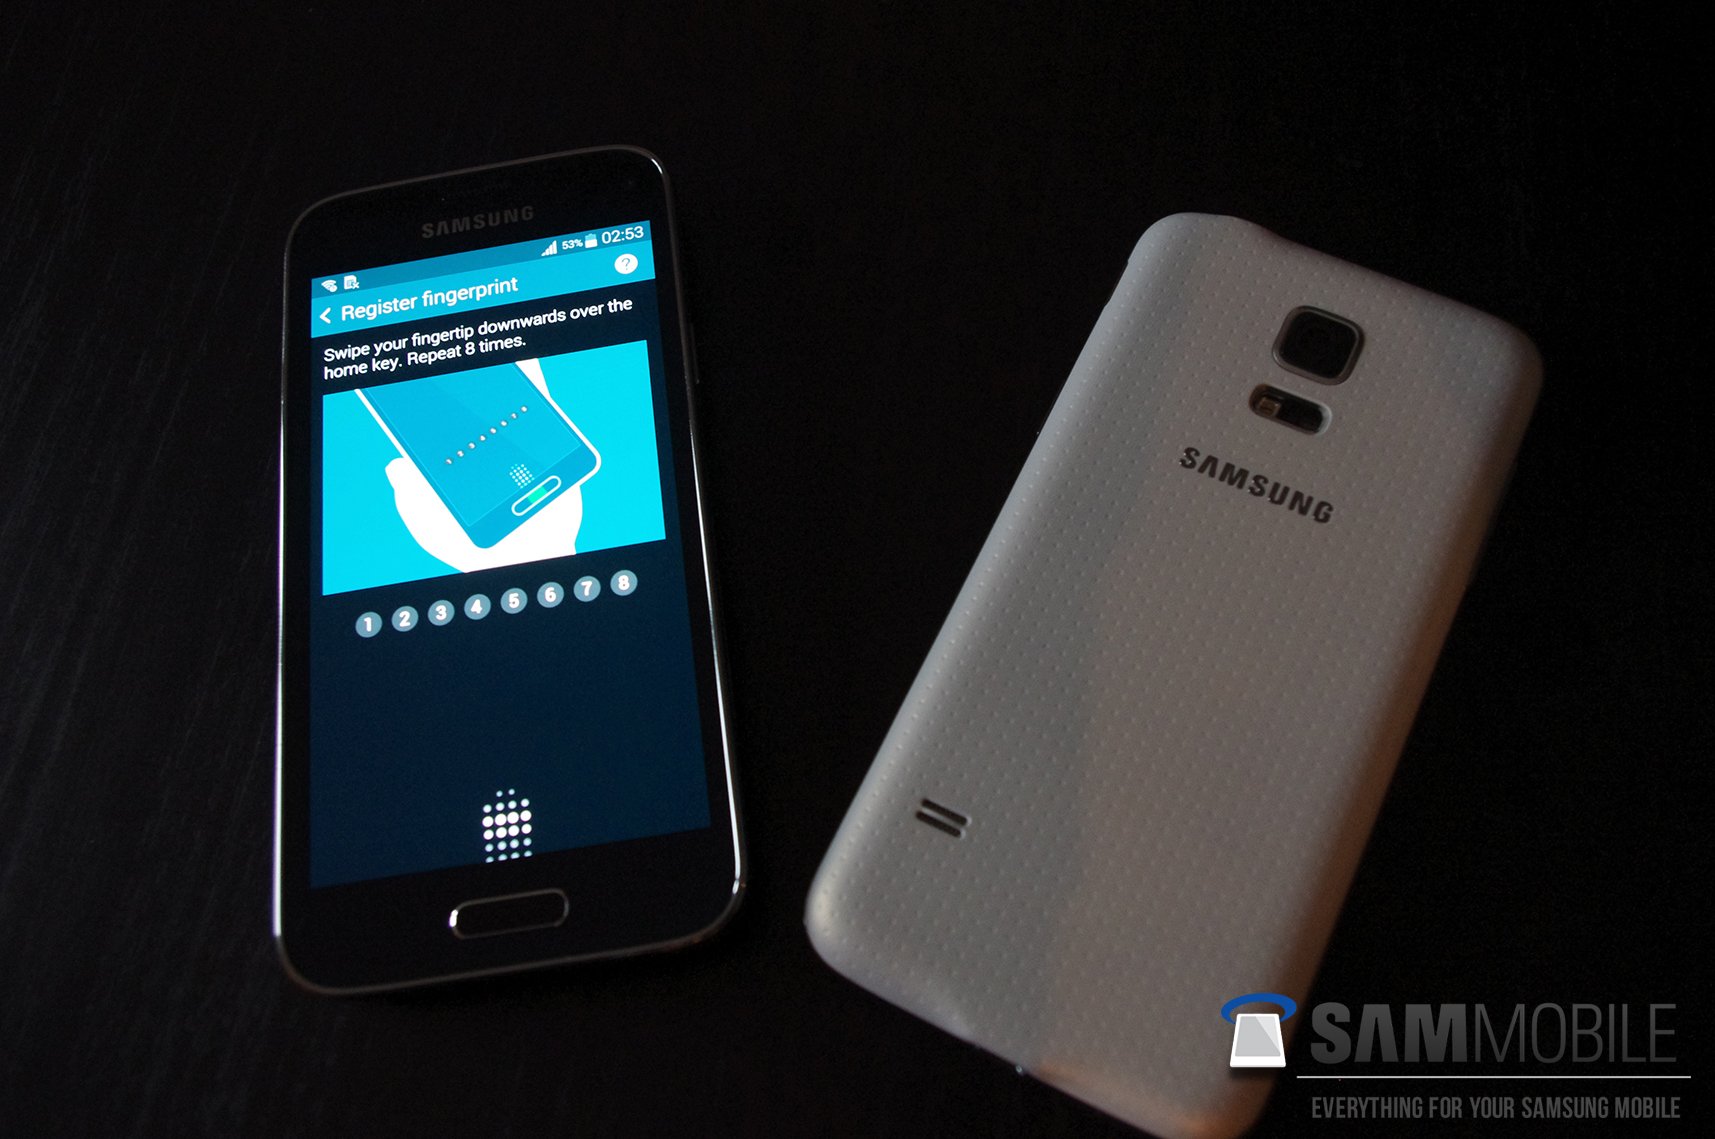 Samsung Galaxy S5 Mini picture and specs is leaked online